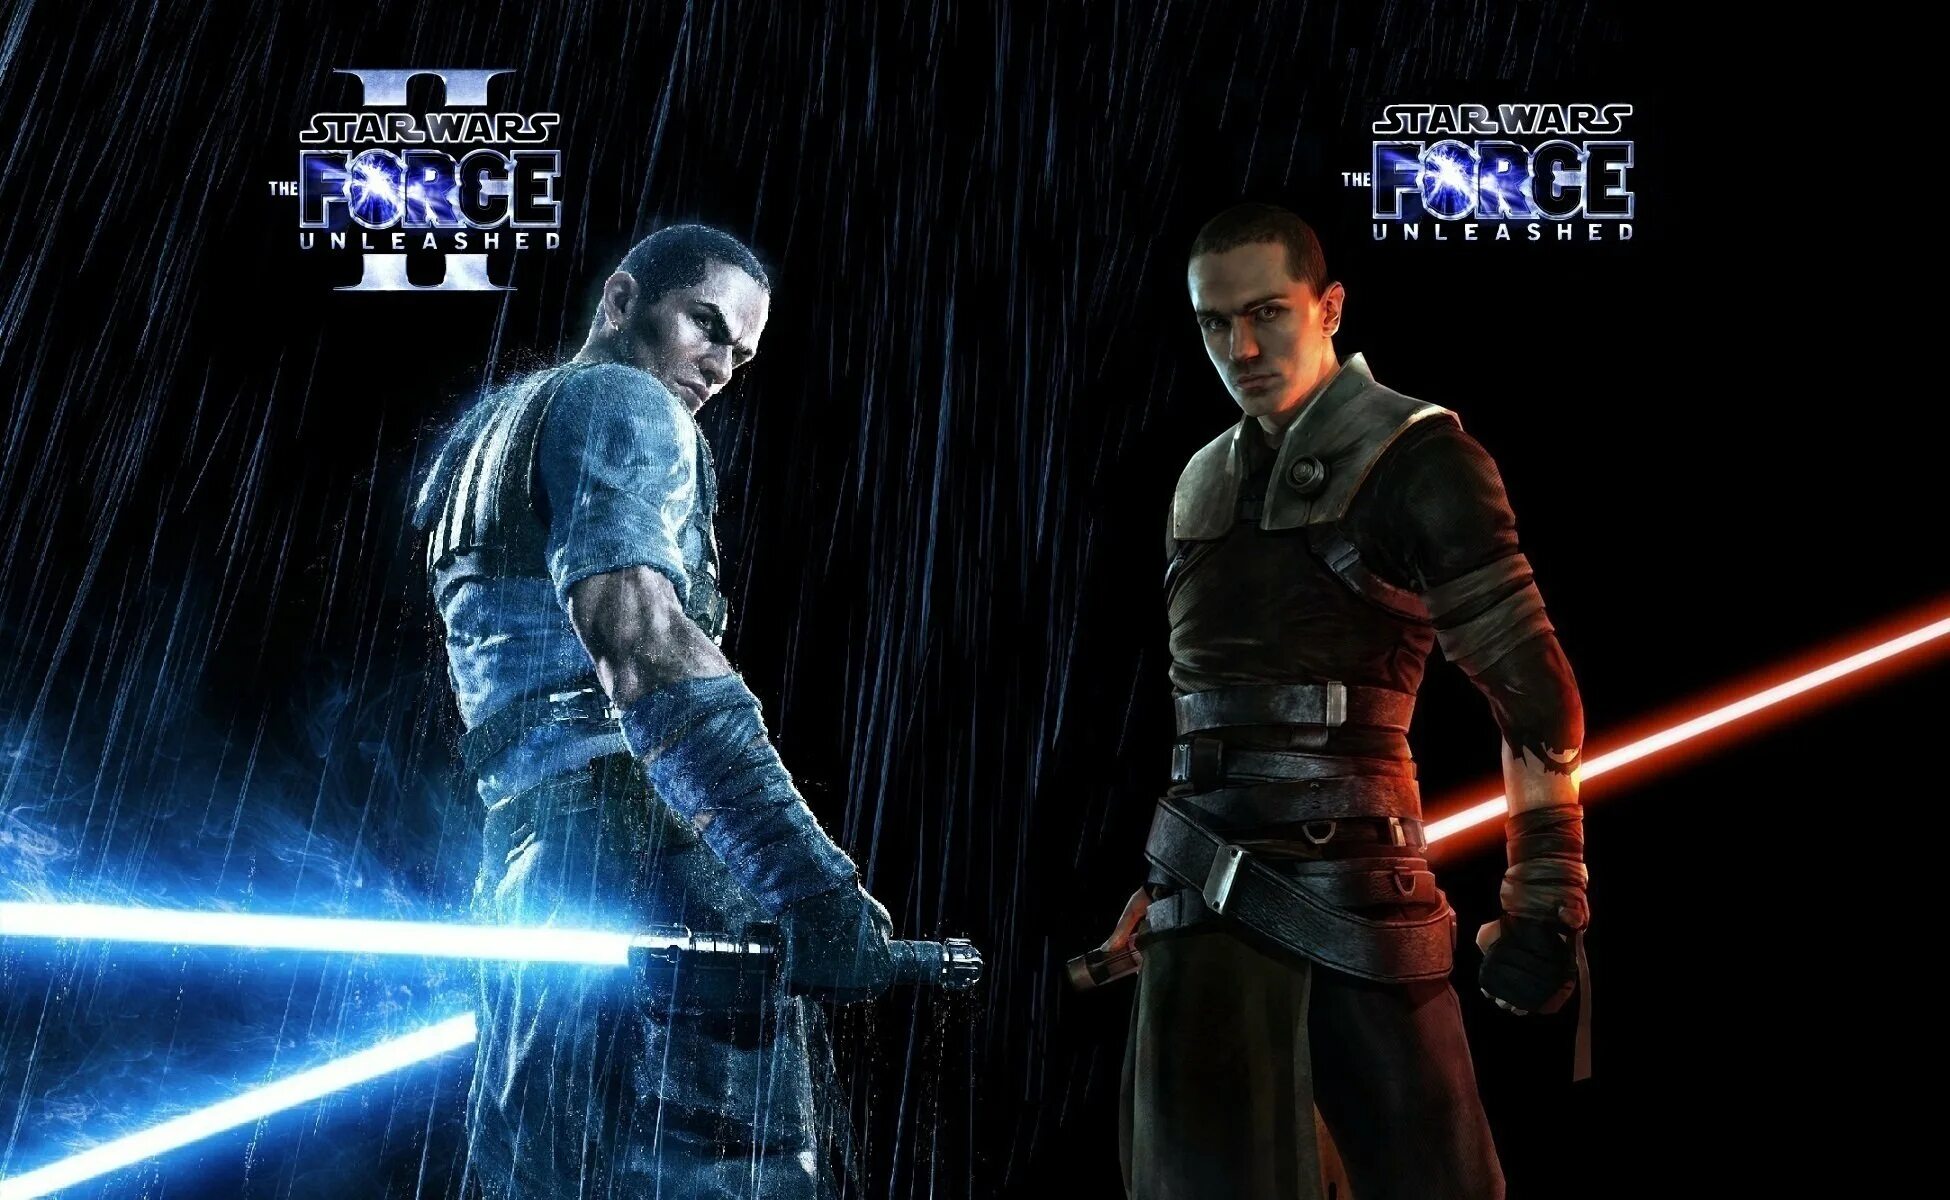 Star wars the force unleashed коды. Стар ВАРС the Force unleashed 1. Star Wars unleashed 2 Старкиллер. Star Wars the Force unleashed Старкиллер. Стар ВАРС the Force unleashed 2.